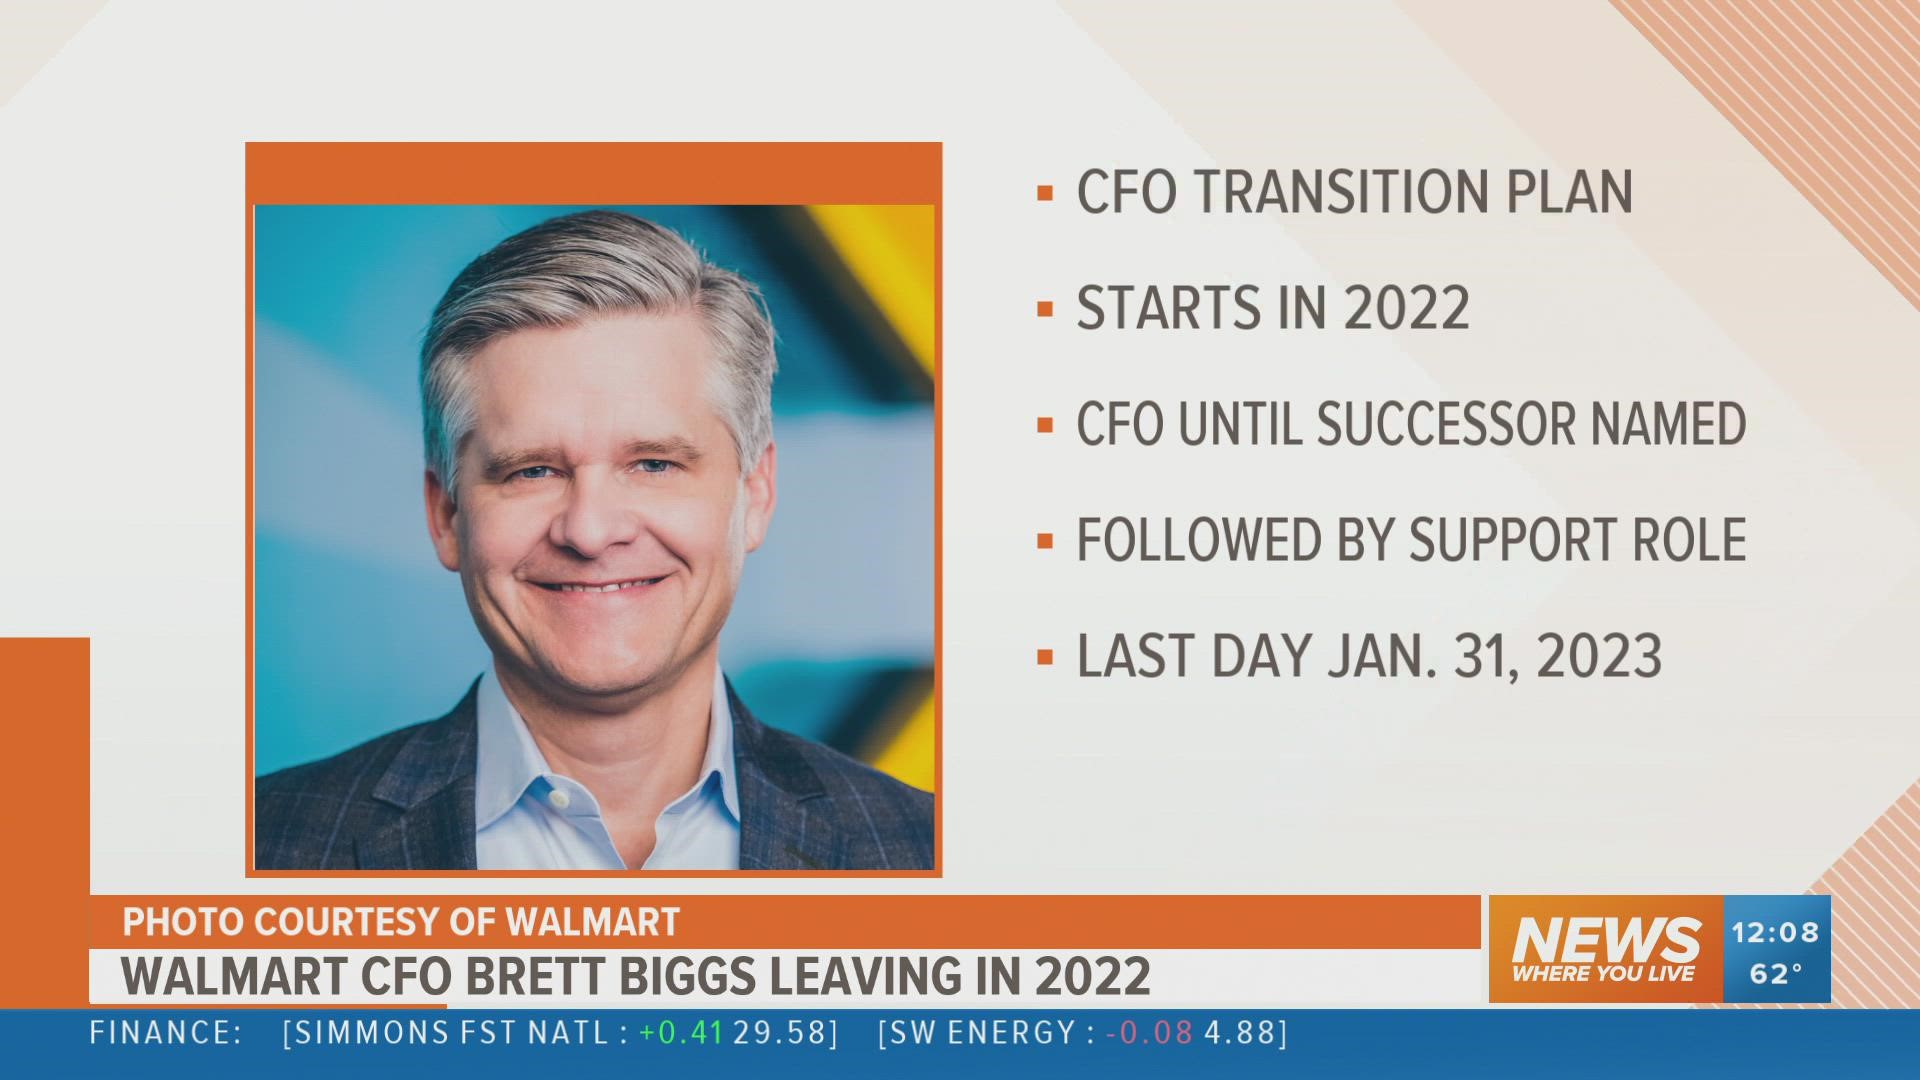 Brett Biggs will officially leave the company on Jan. 31, 2023.